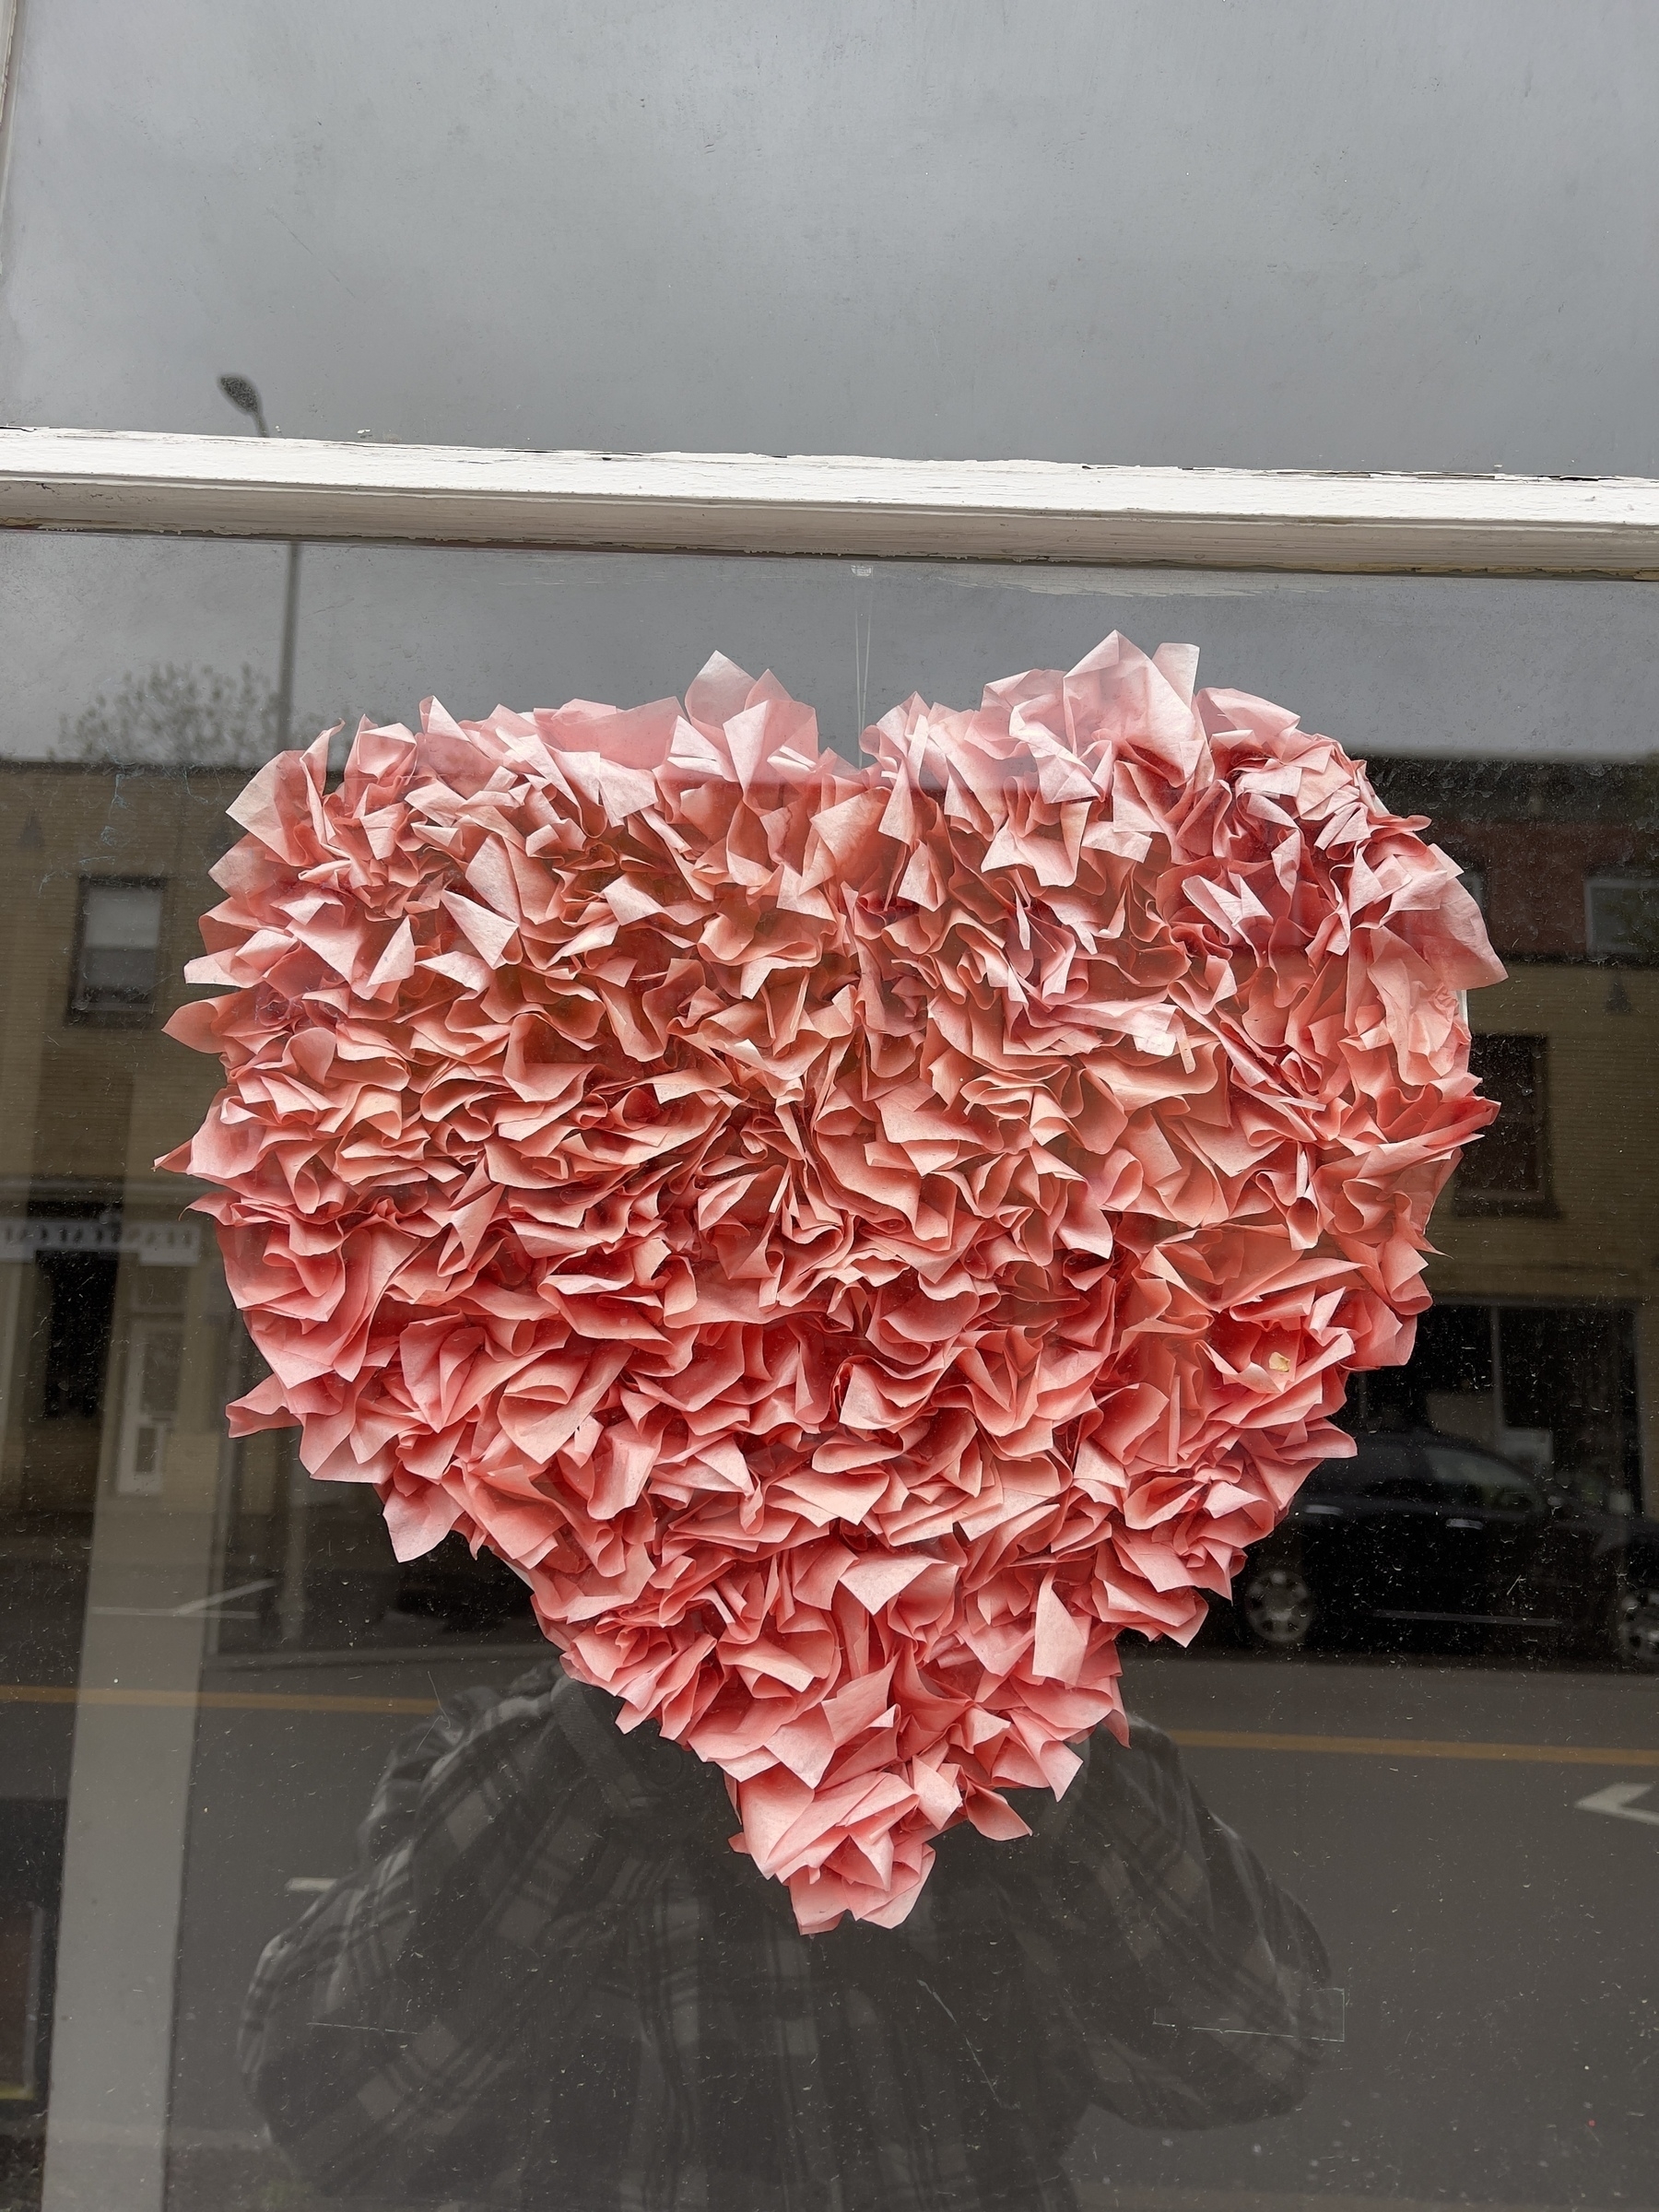 Frilly pink heart hanging in shop window.